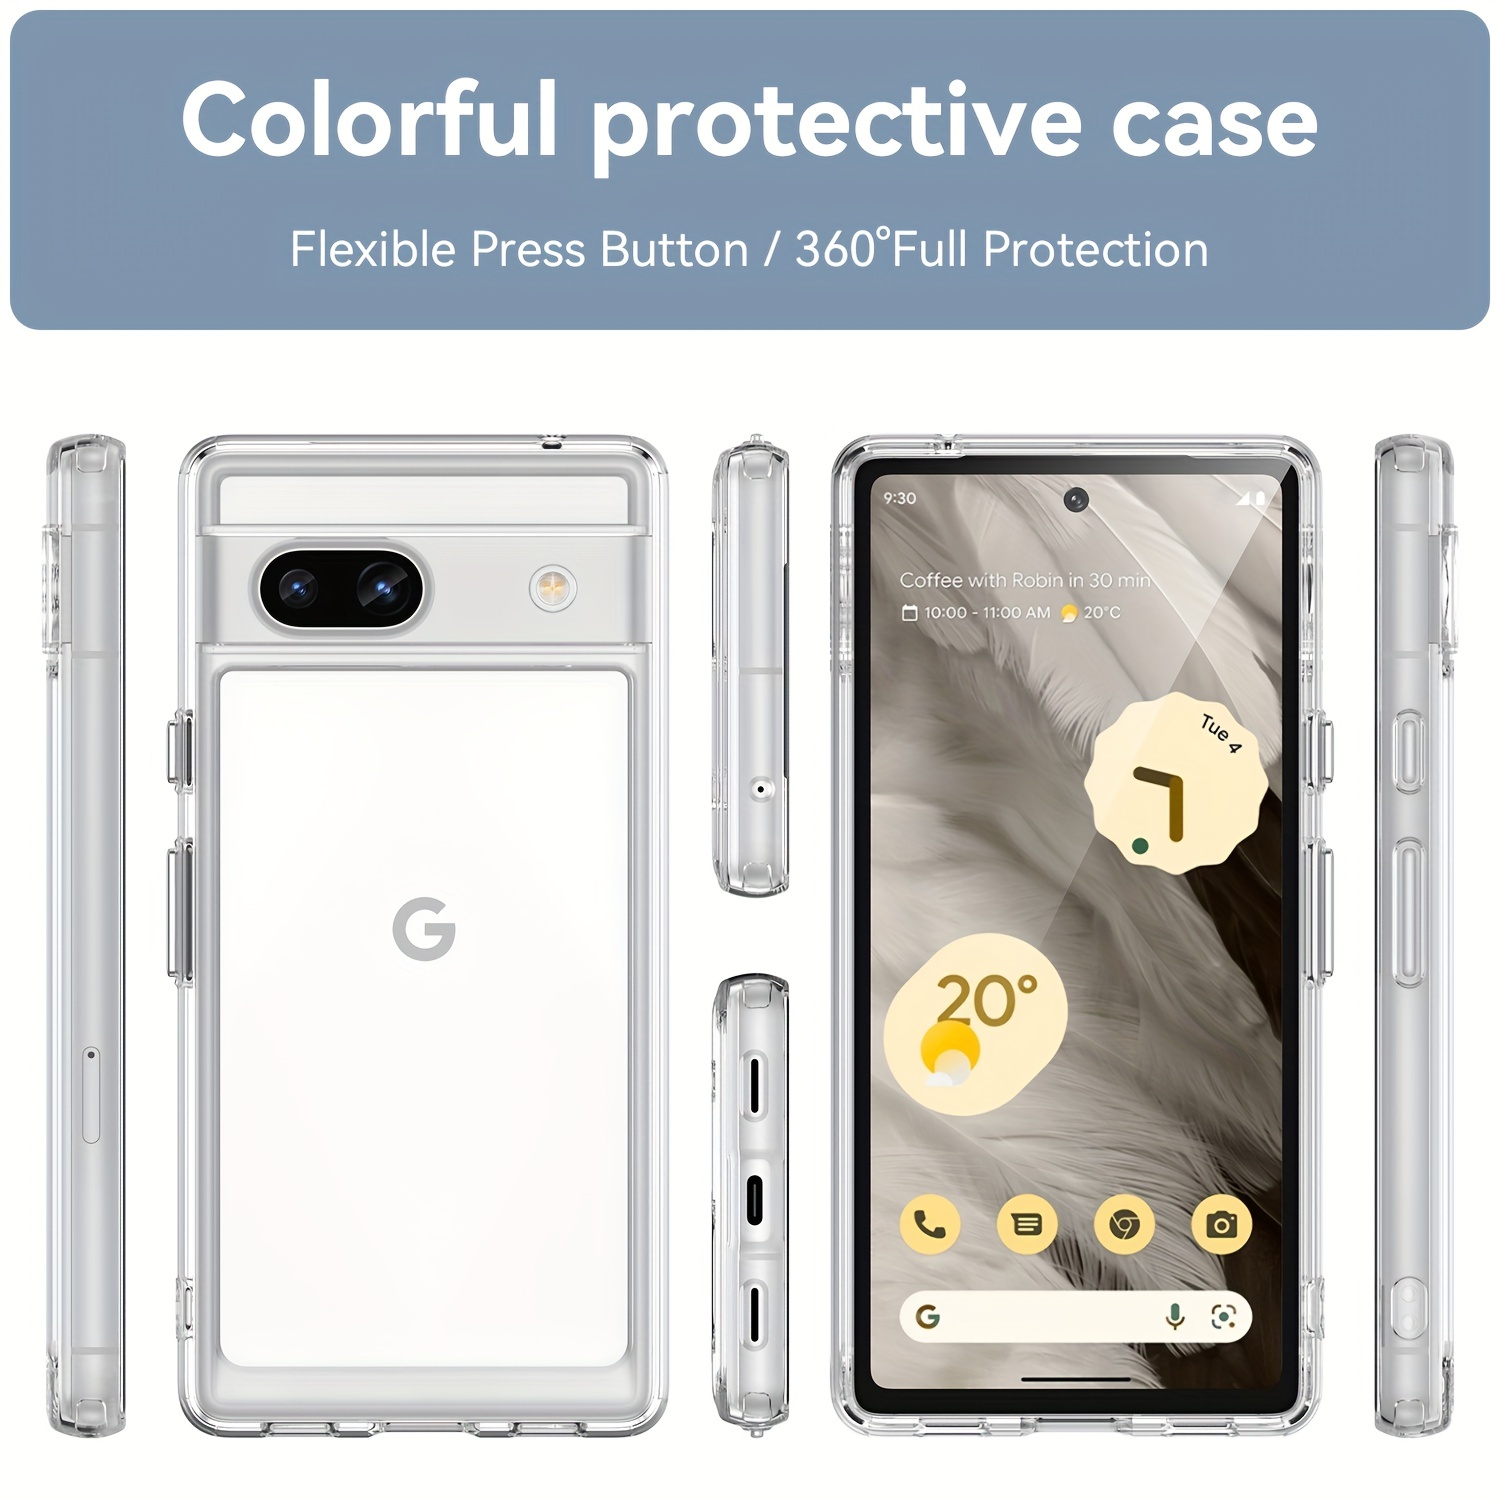 The Best Google Pixel 7a Cases for 2023 - Cases for Pixel 7a